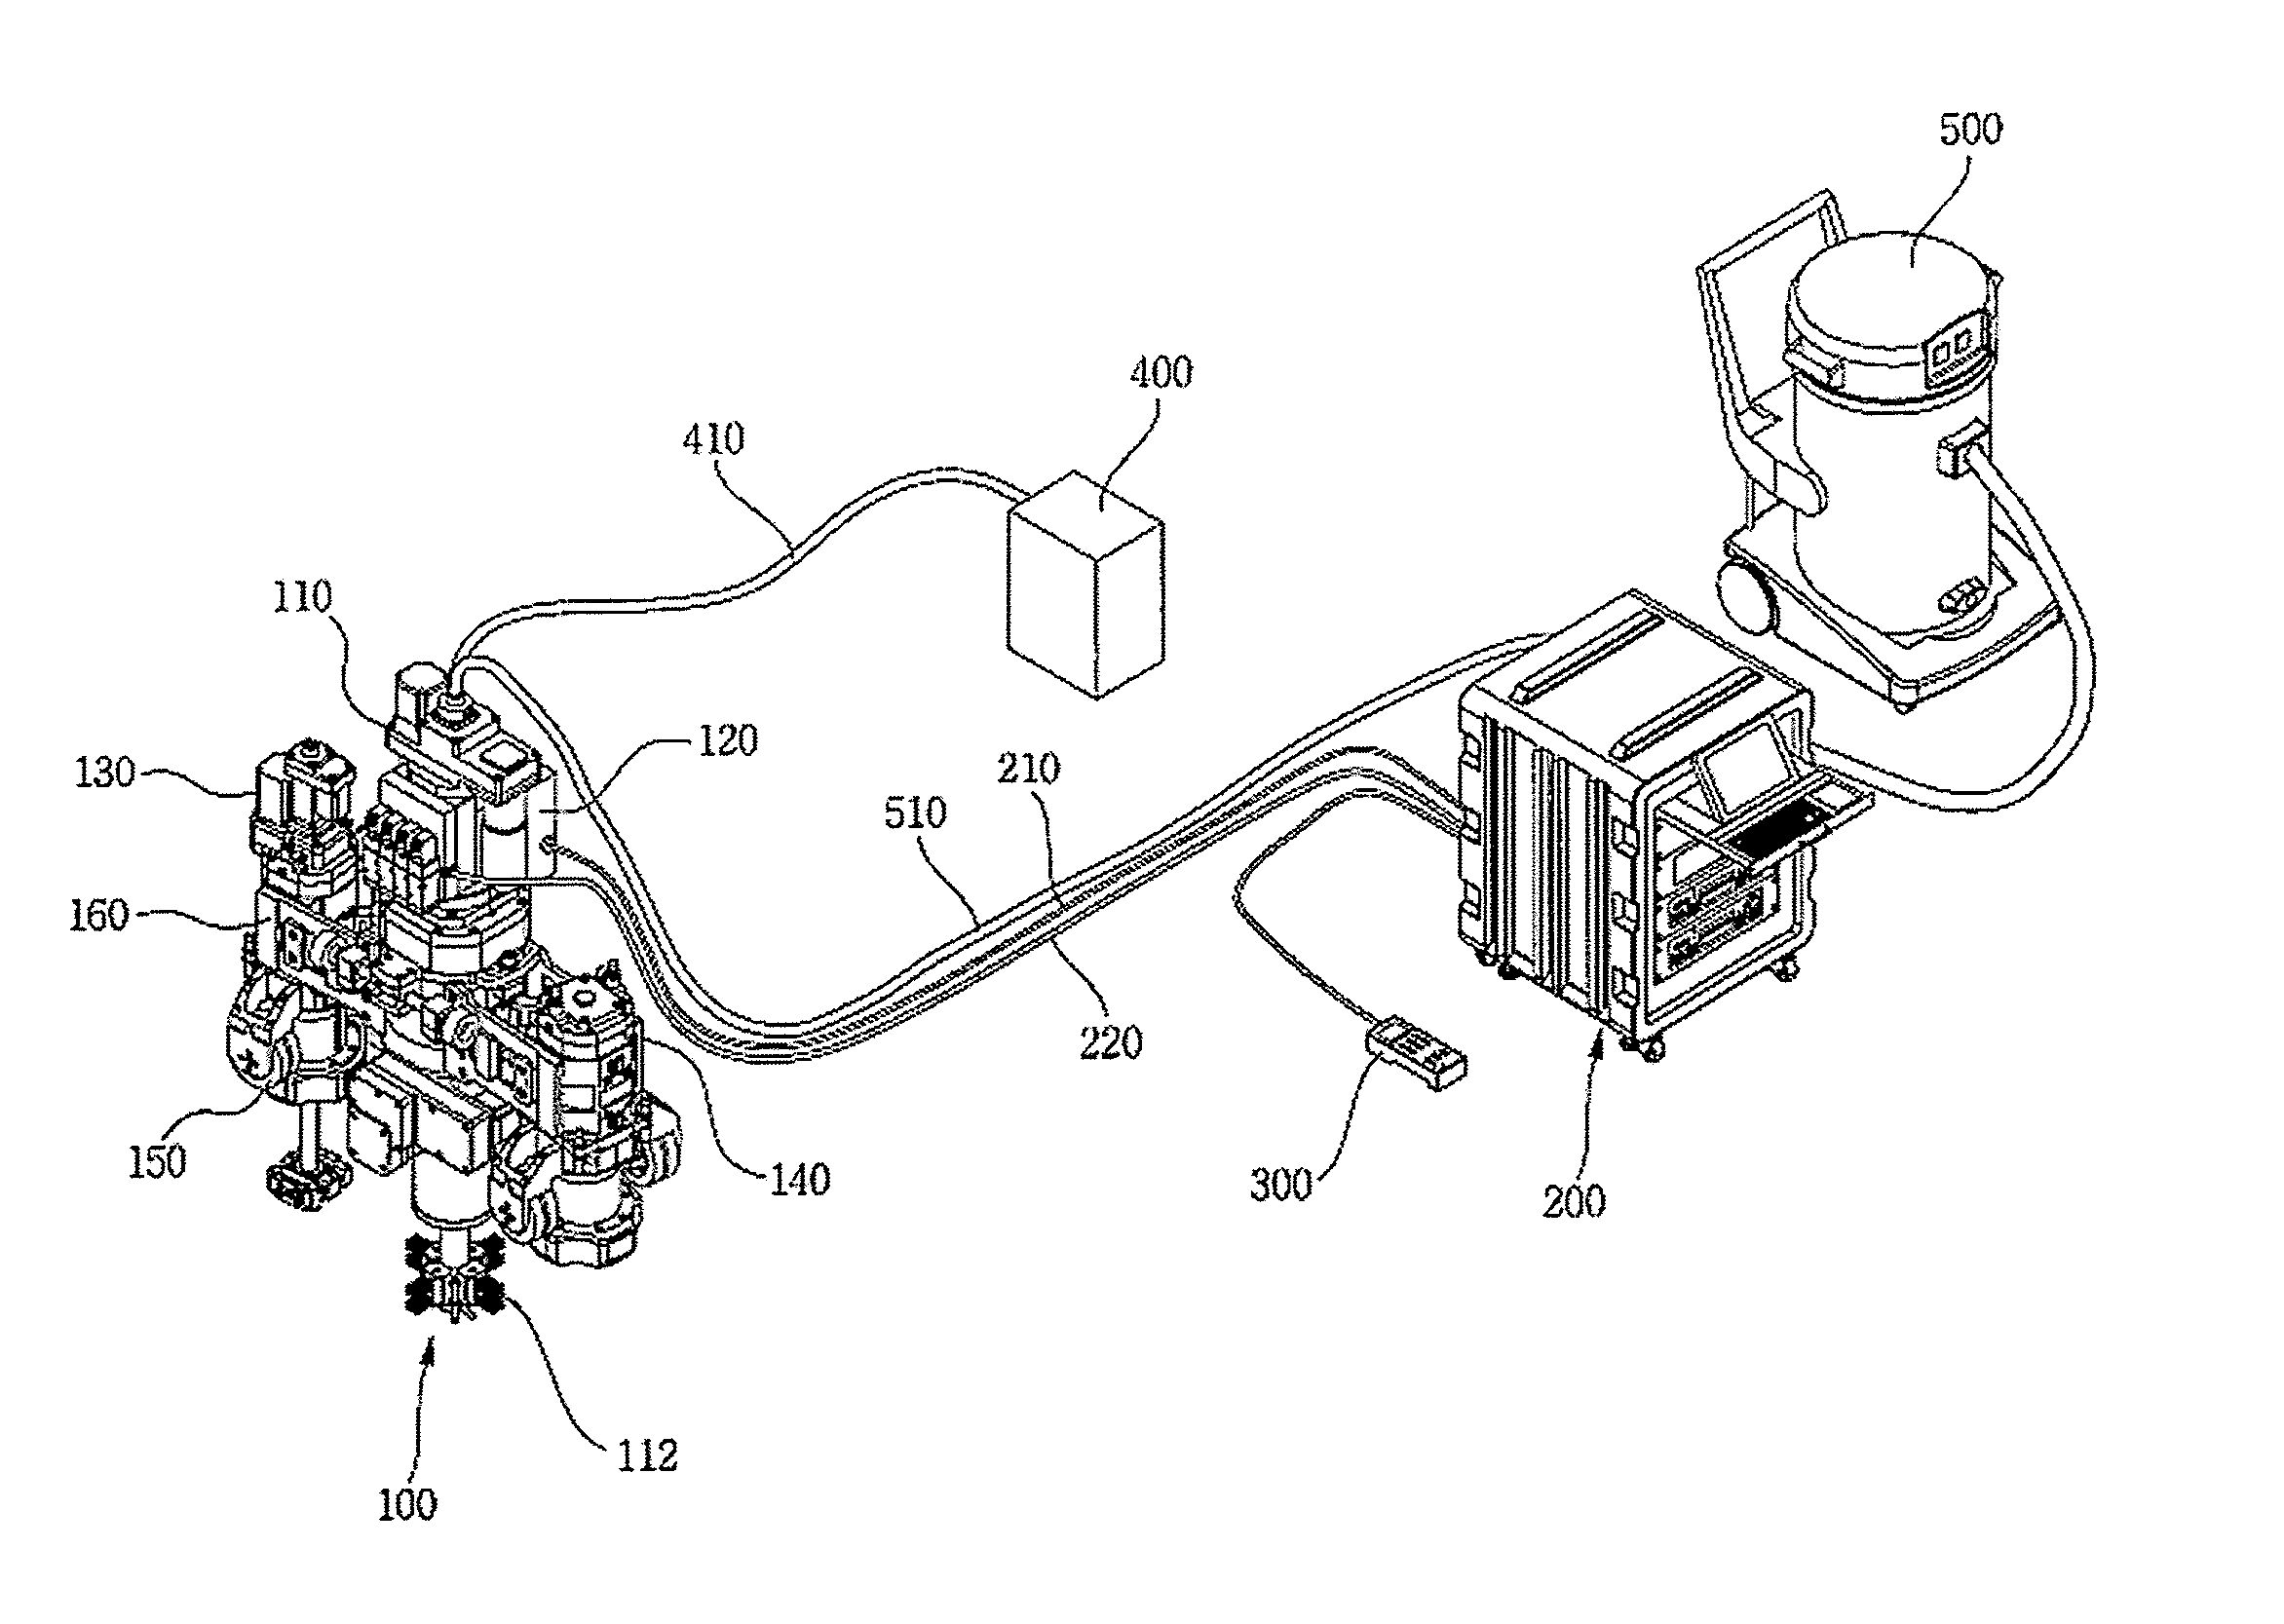 System for automatically cleaning and inspecting stud bolt holes, and managing histories of the stud bolt holes